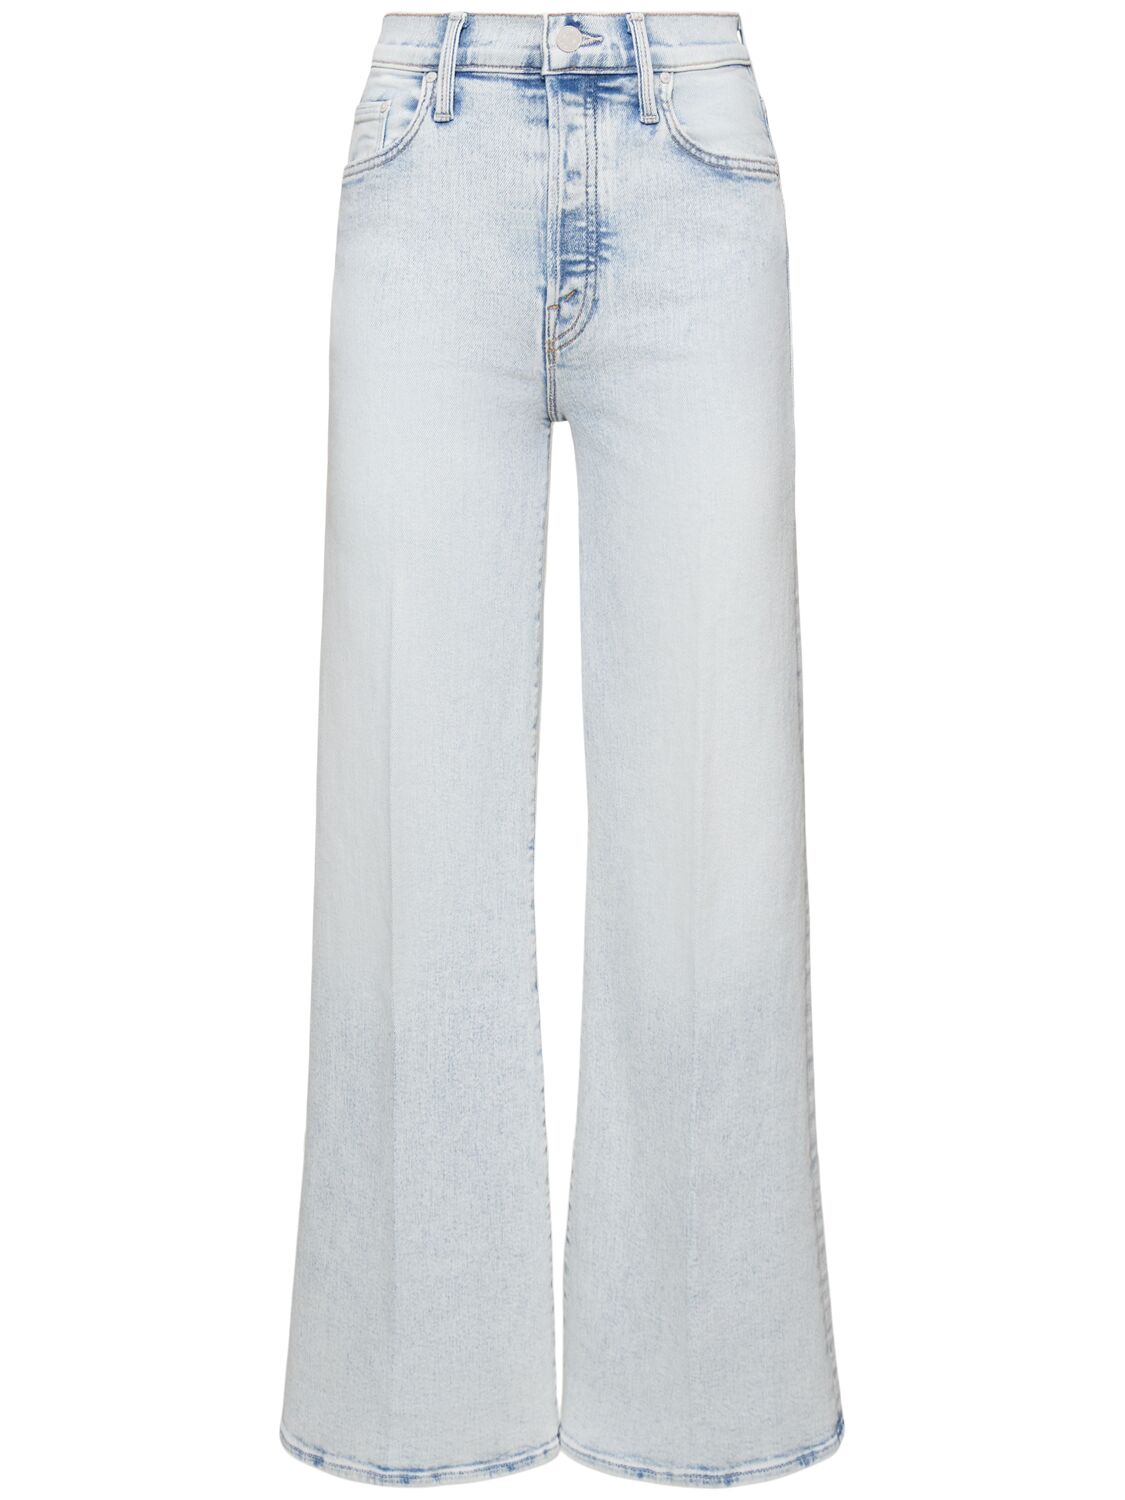 The Tomcat Roller High Rise Jeans